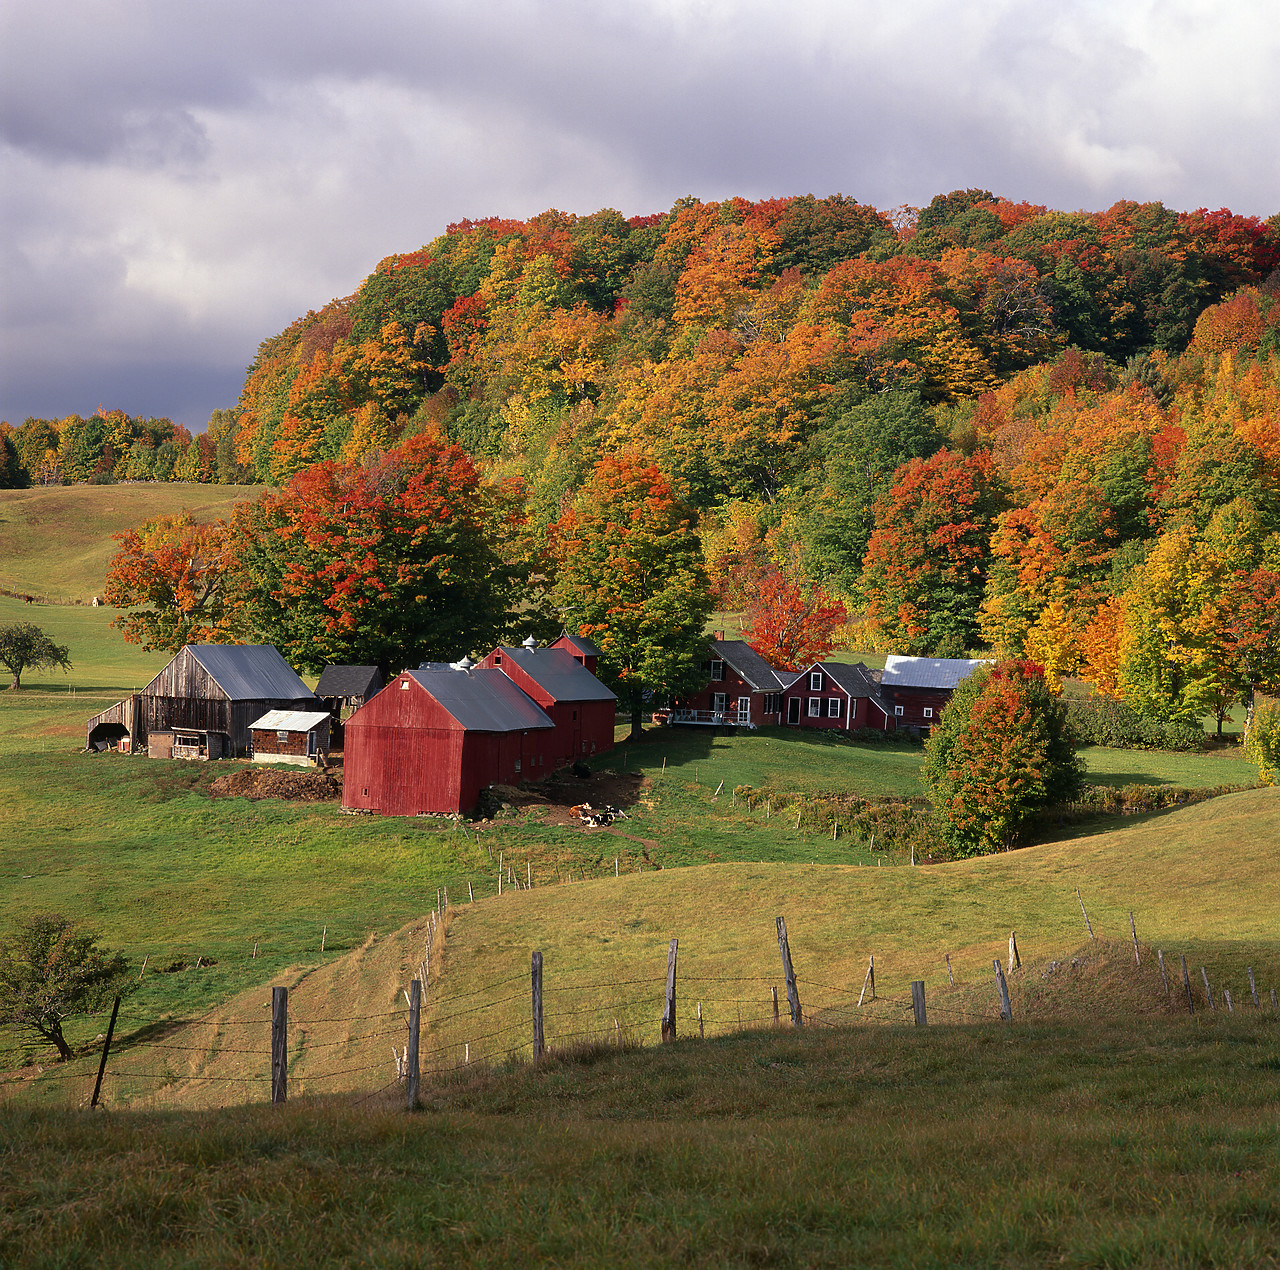 #955771-1 - Jenne Farm in Autumn, South Woodstock, Vermont, USA